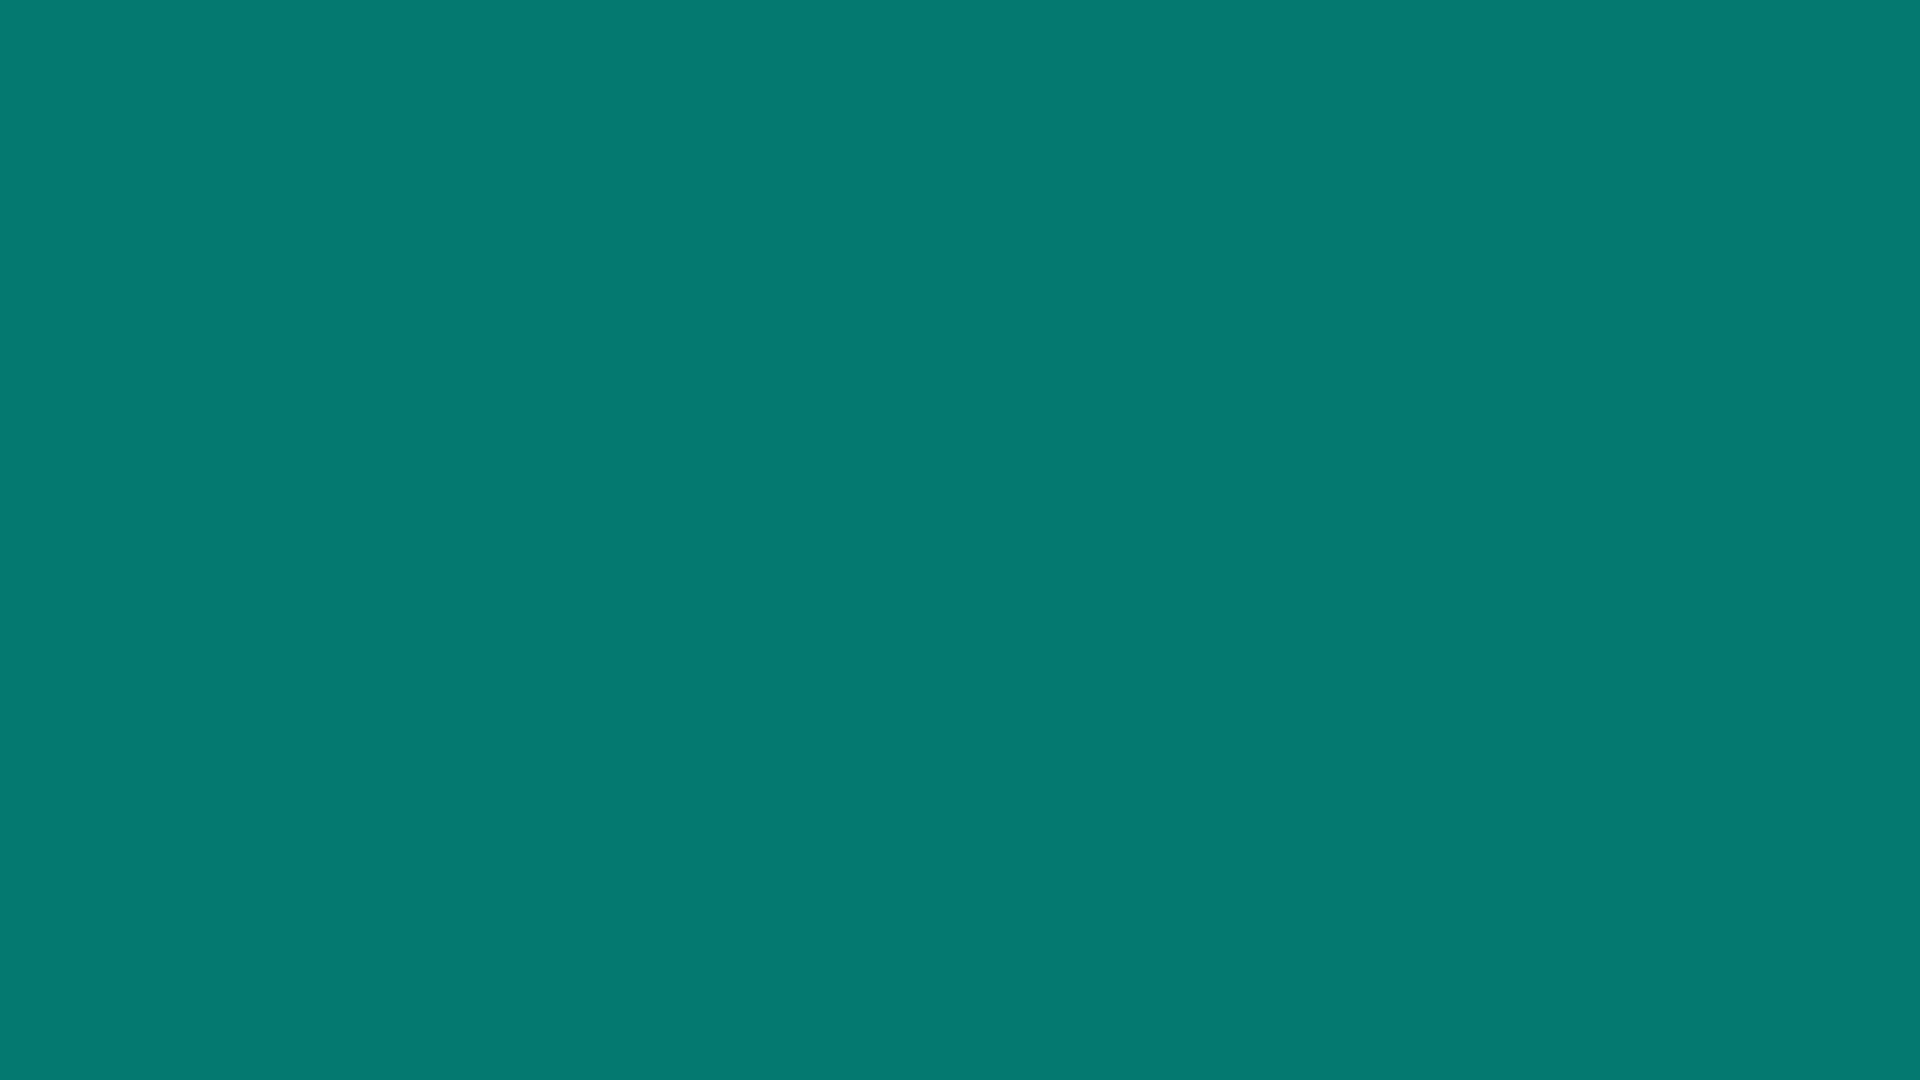 1920x1080 Pine Green Solid Color Background